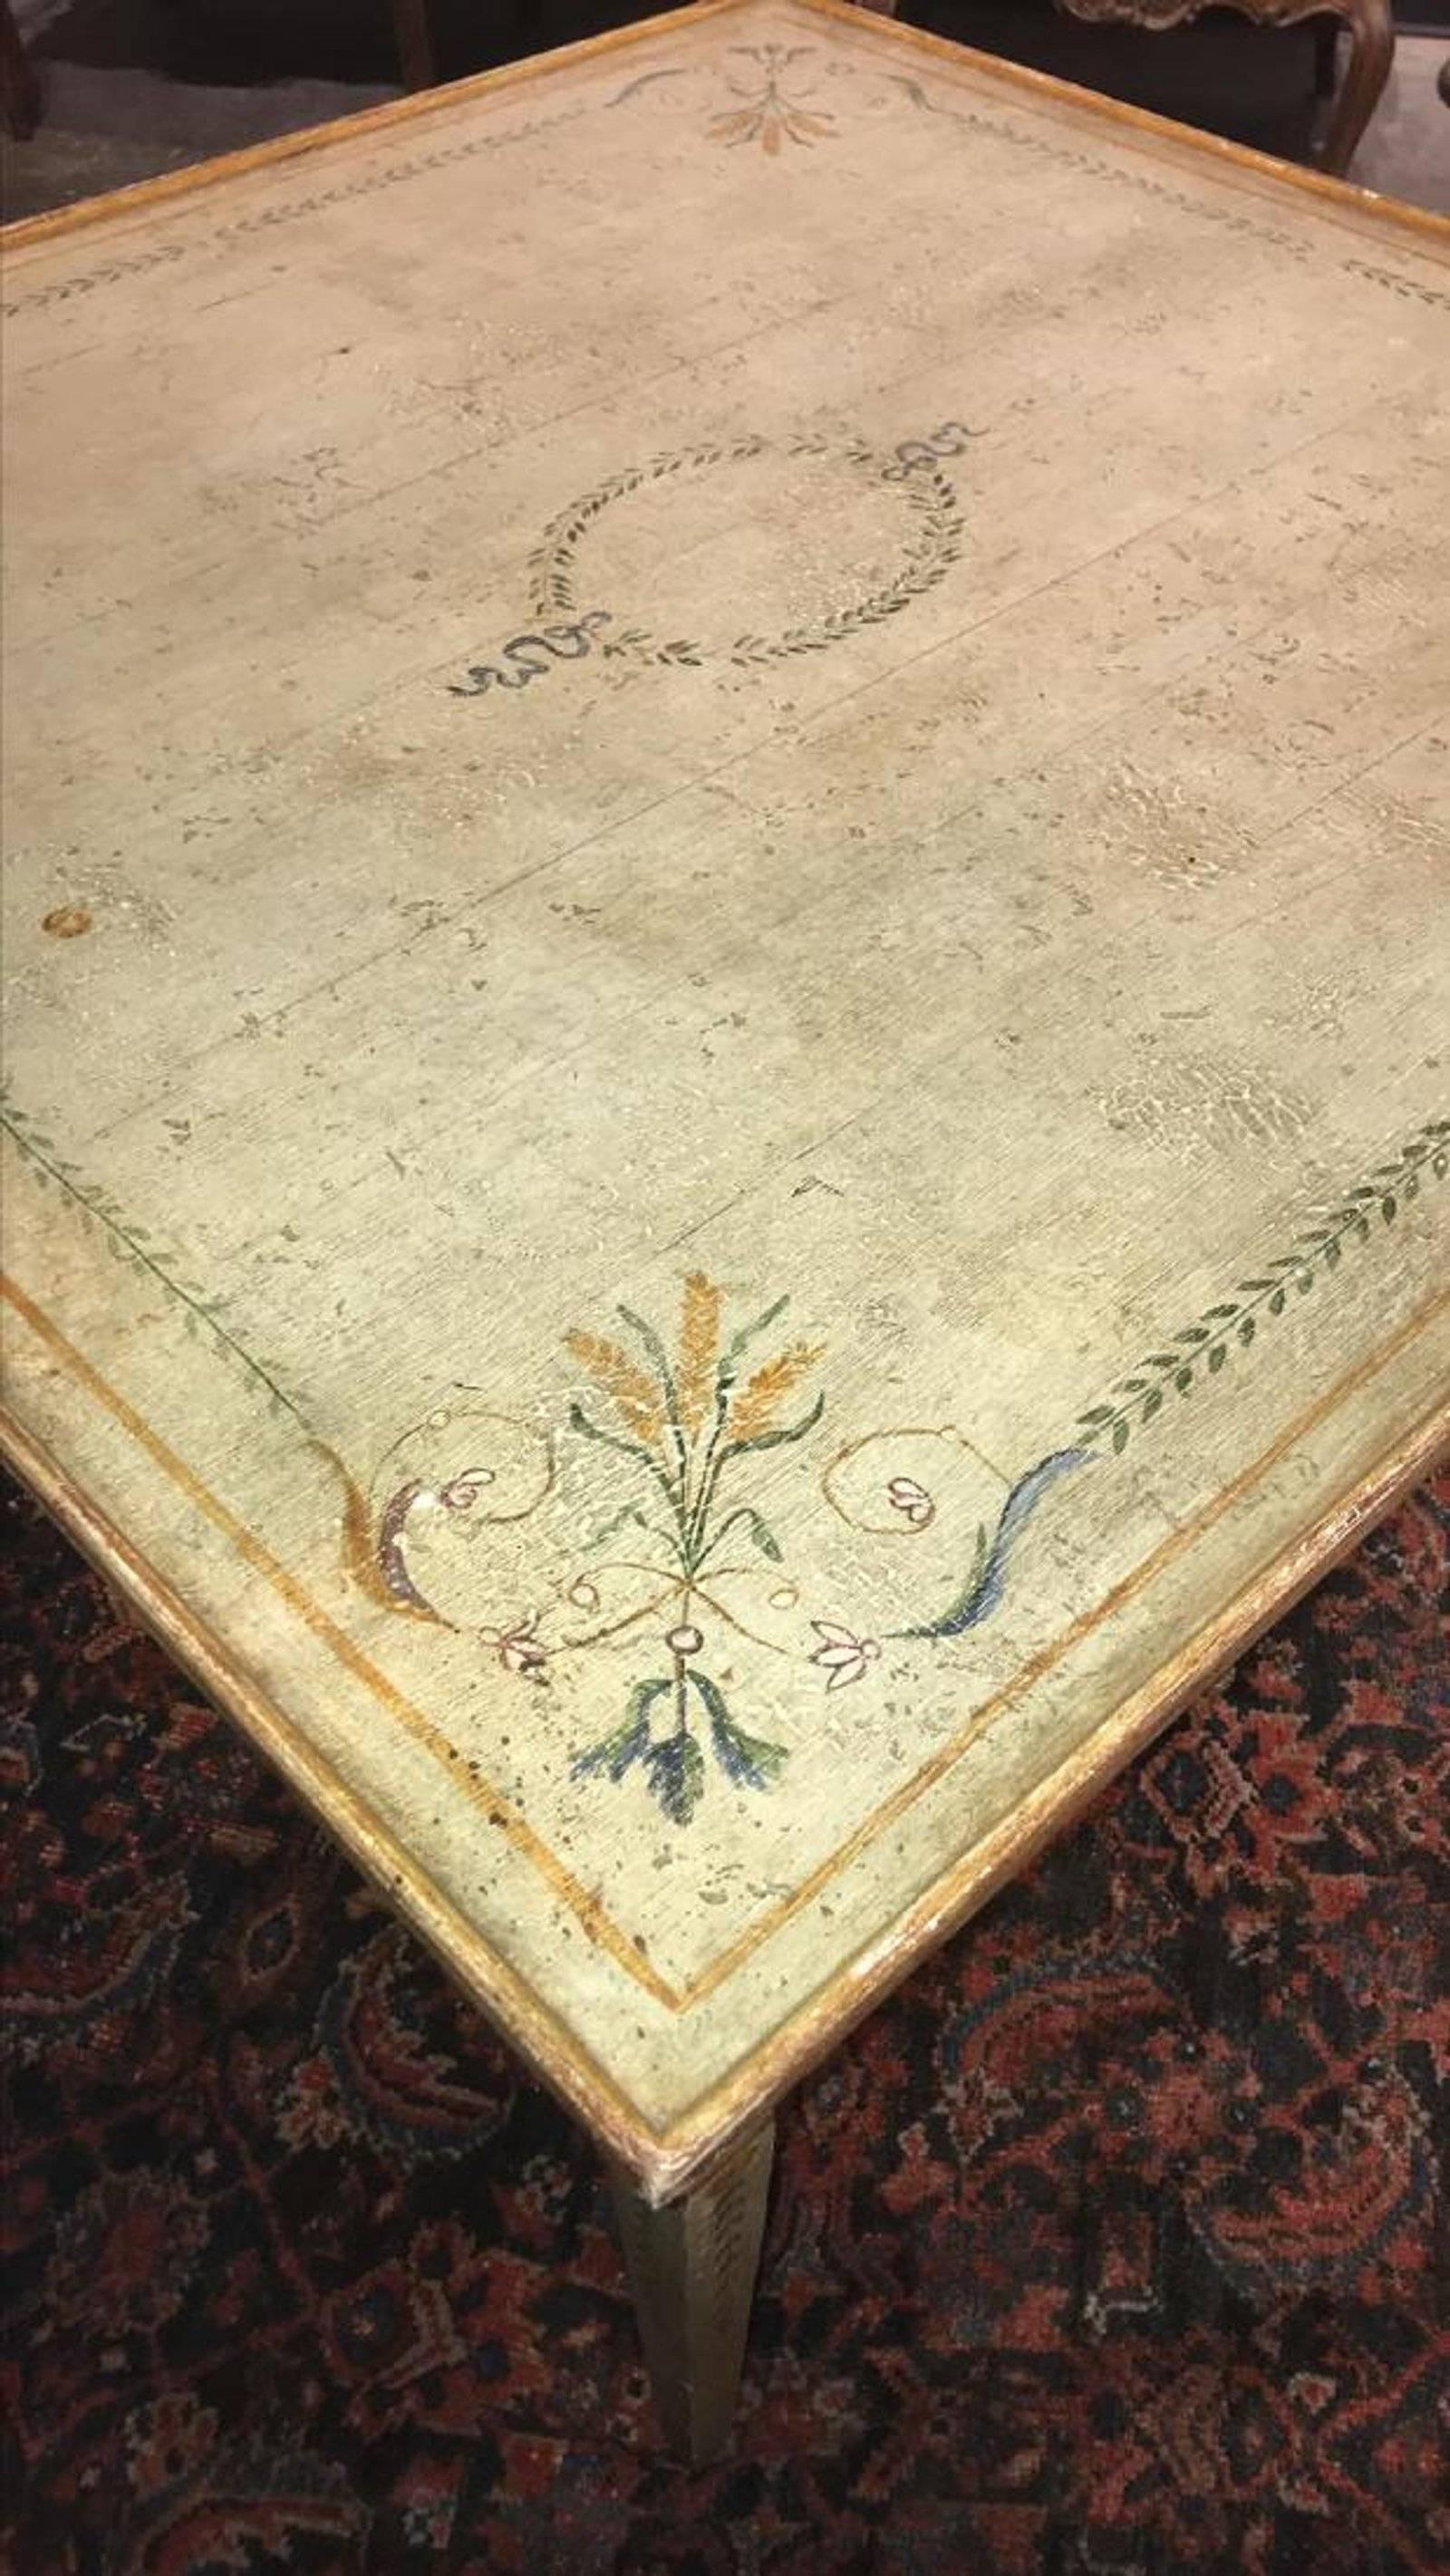 Lovely early 20th century Italian neoclassical style table, hand-painted in a floral and leaf design with gilt trim and having multiple drawers. The entire on square tapering legs.

